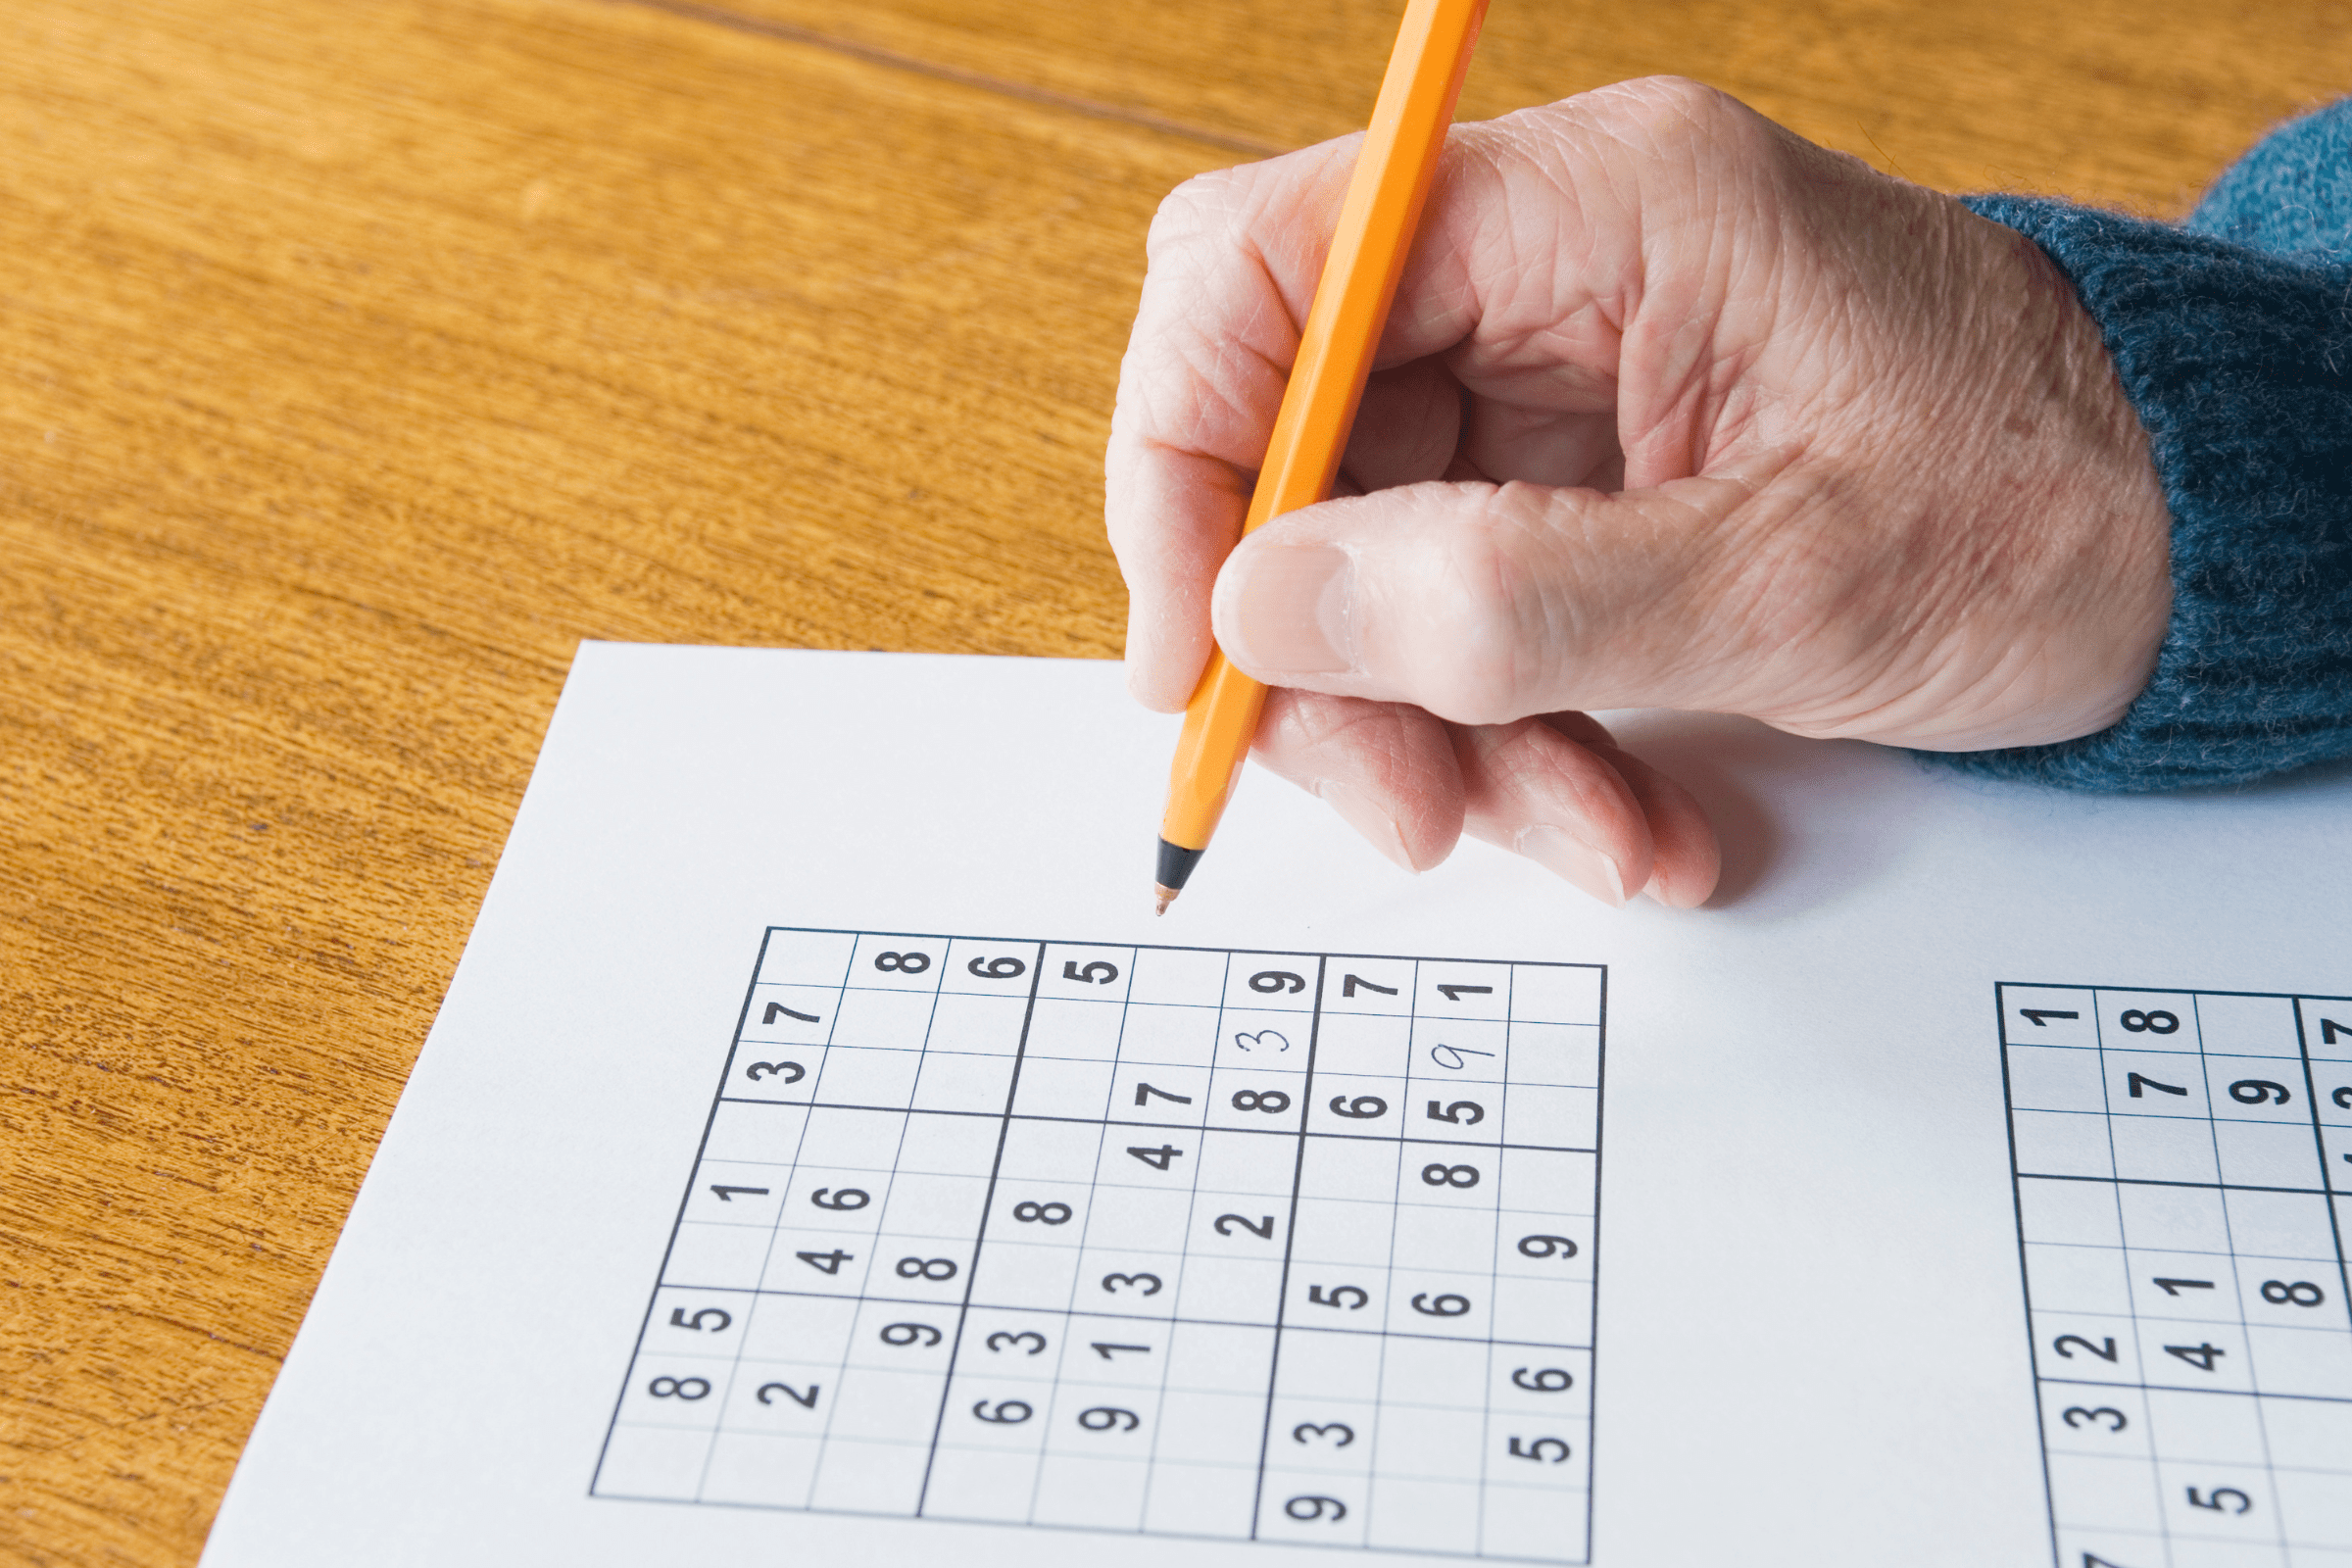 Person filling out a sudoku with a pen